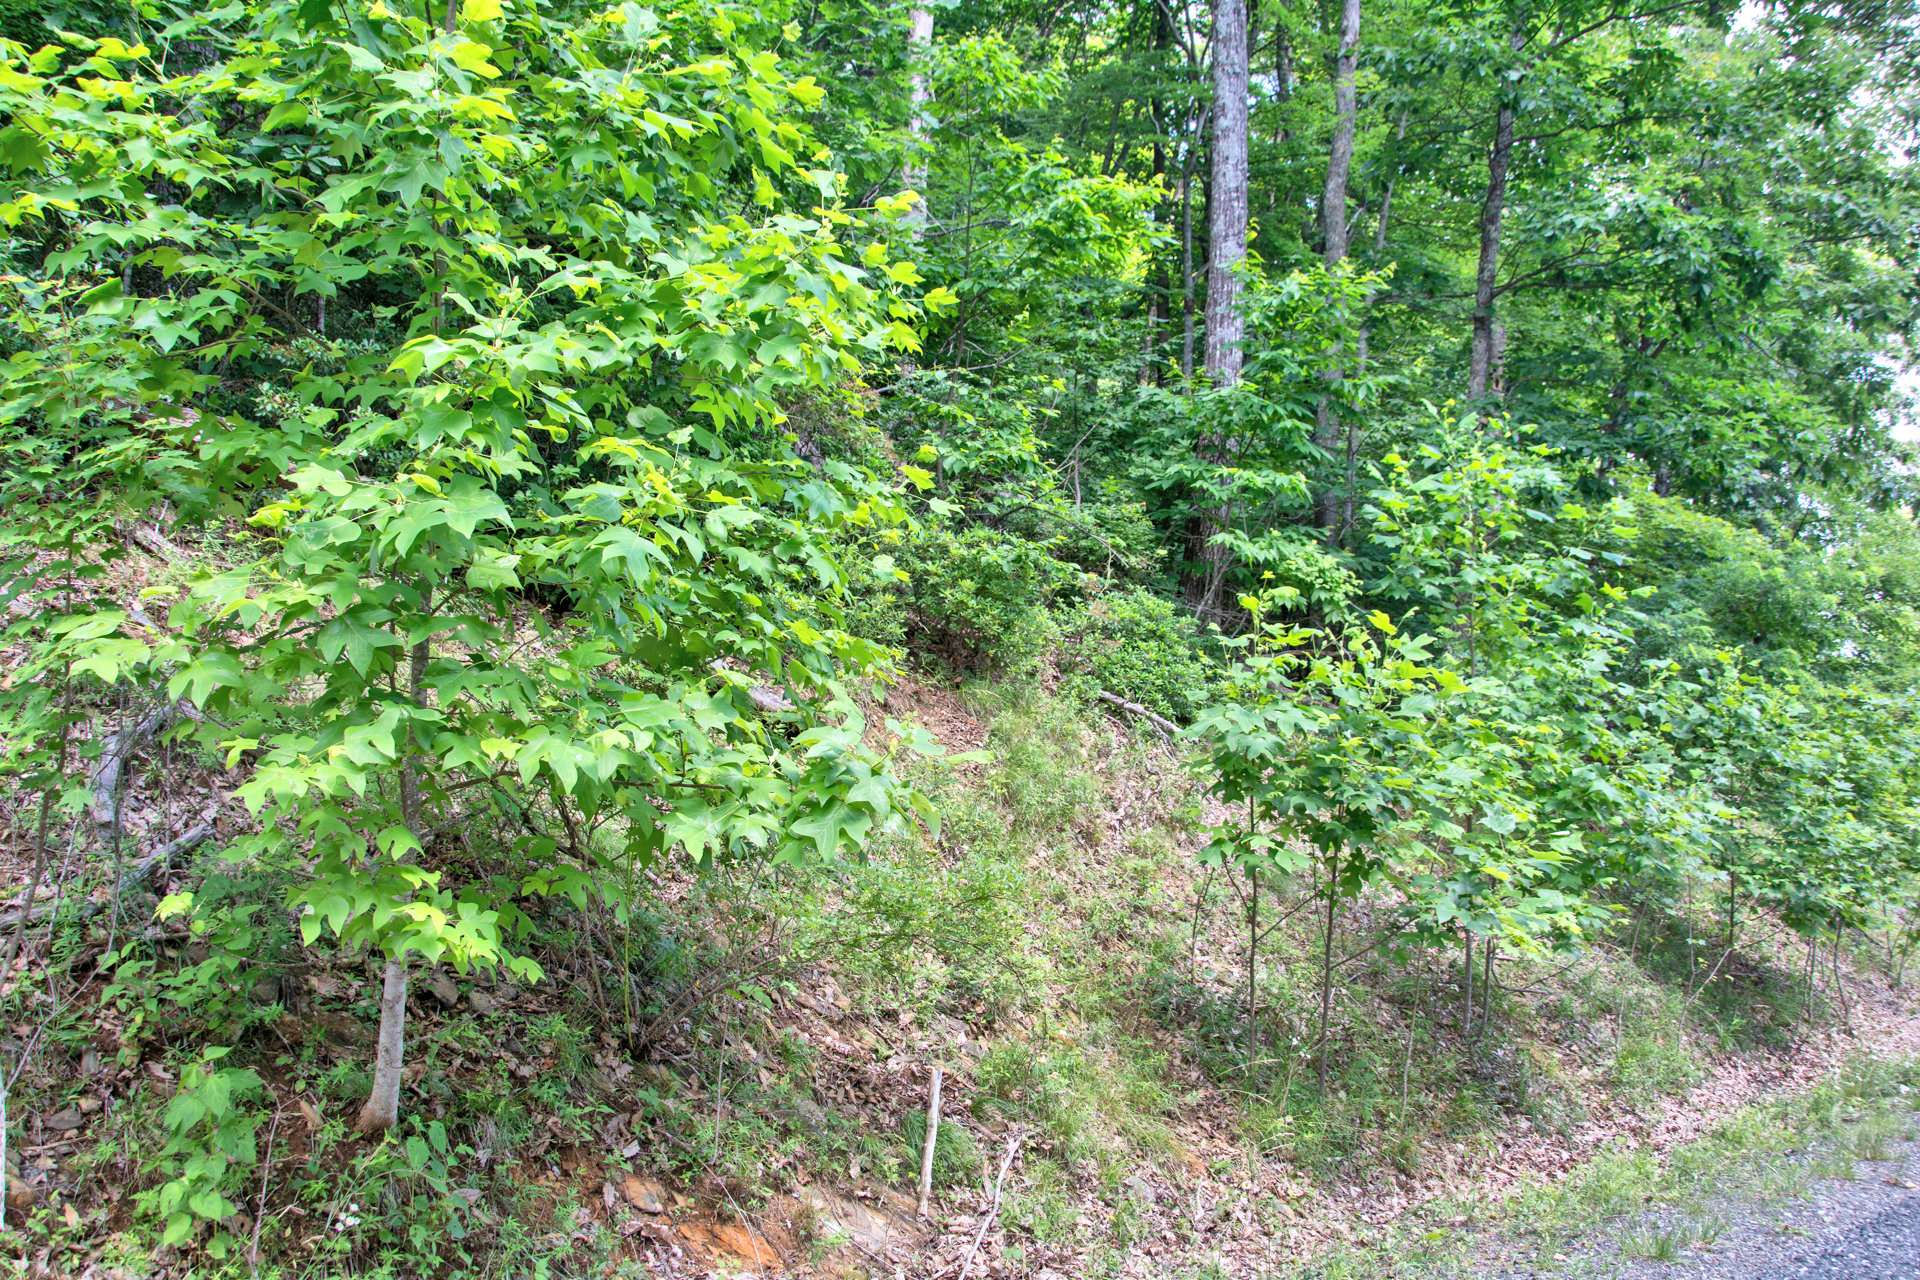 Another great option for your  Stonebridge mountain log cabin is lot 34, a 1.26 acre home site, with shared well rights, offered at $45,000.